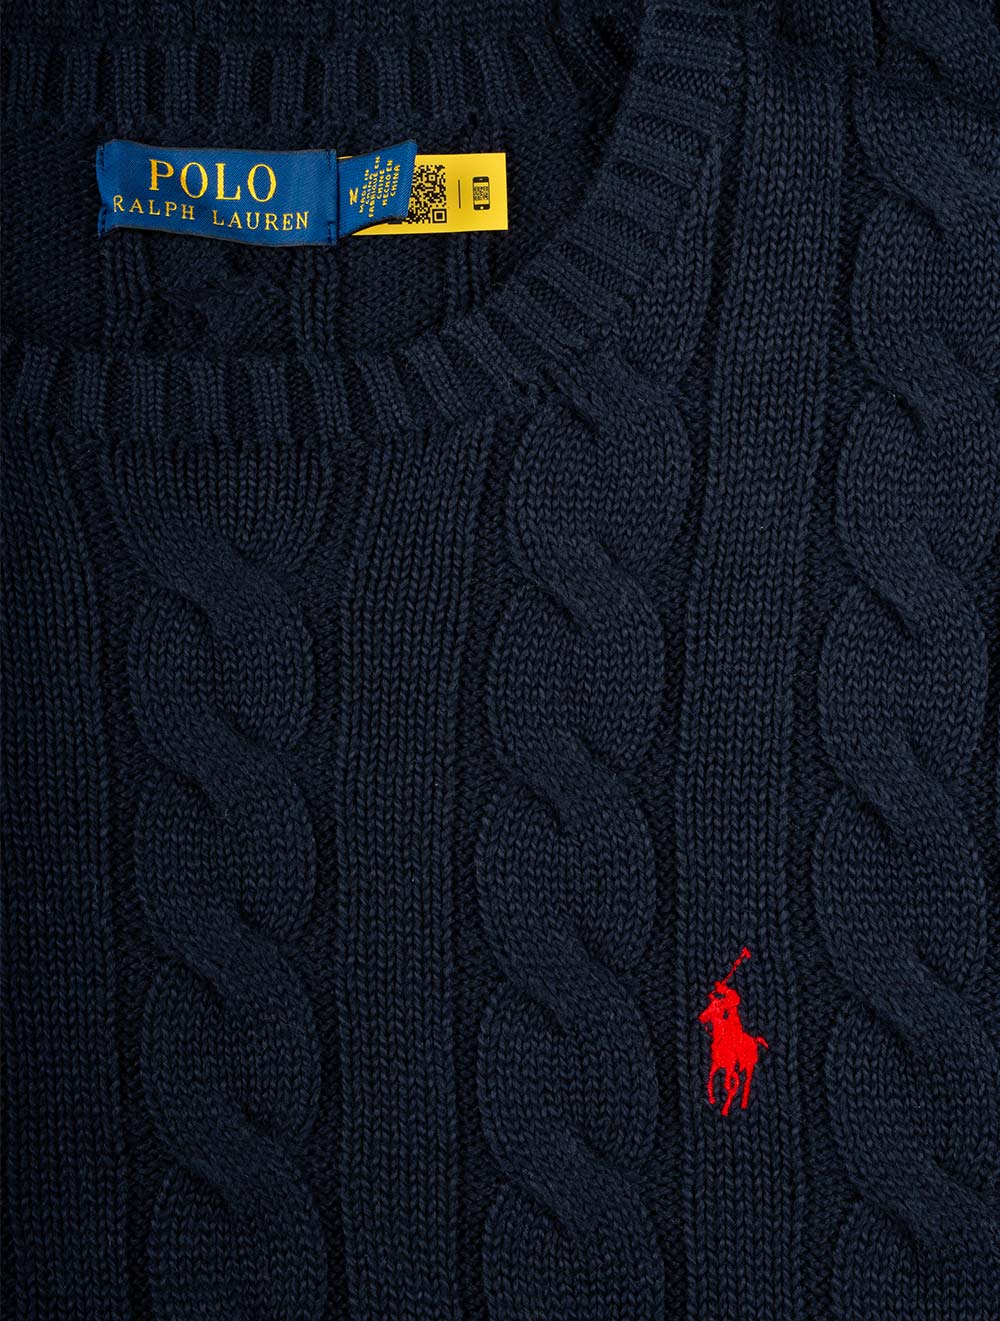 Cotton Cable Sweater Cruise Navy